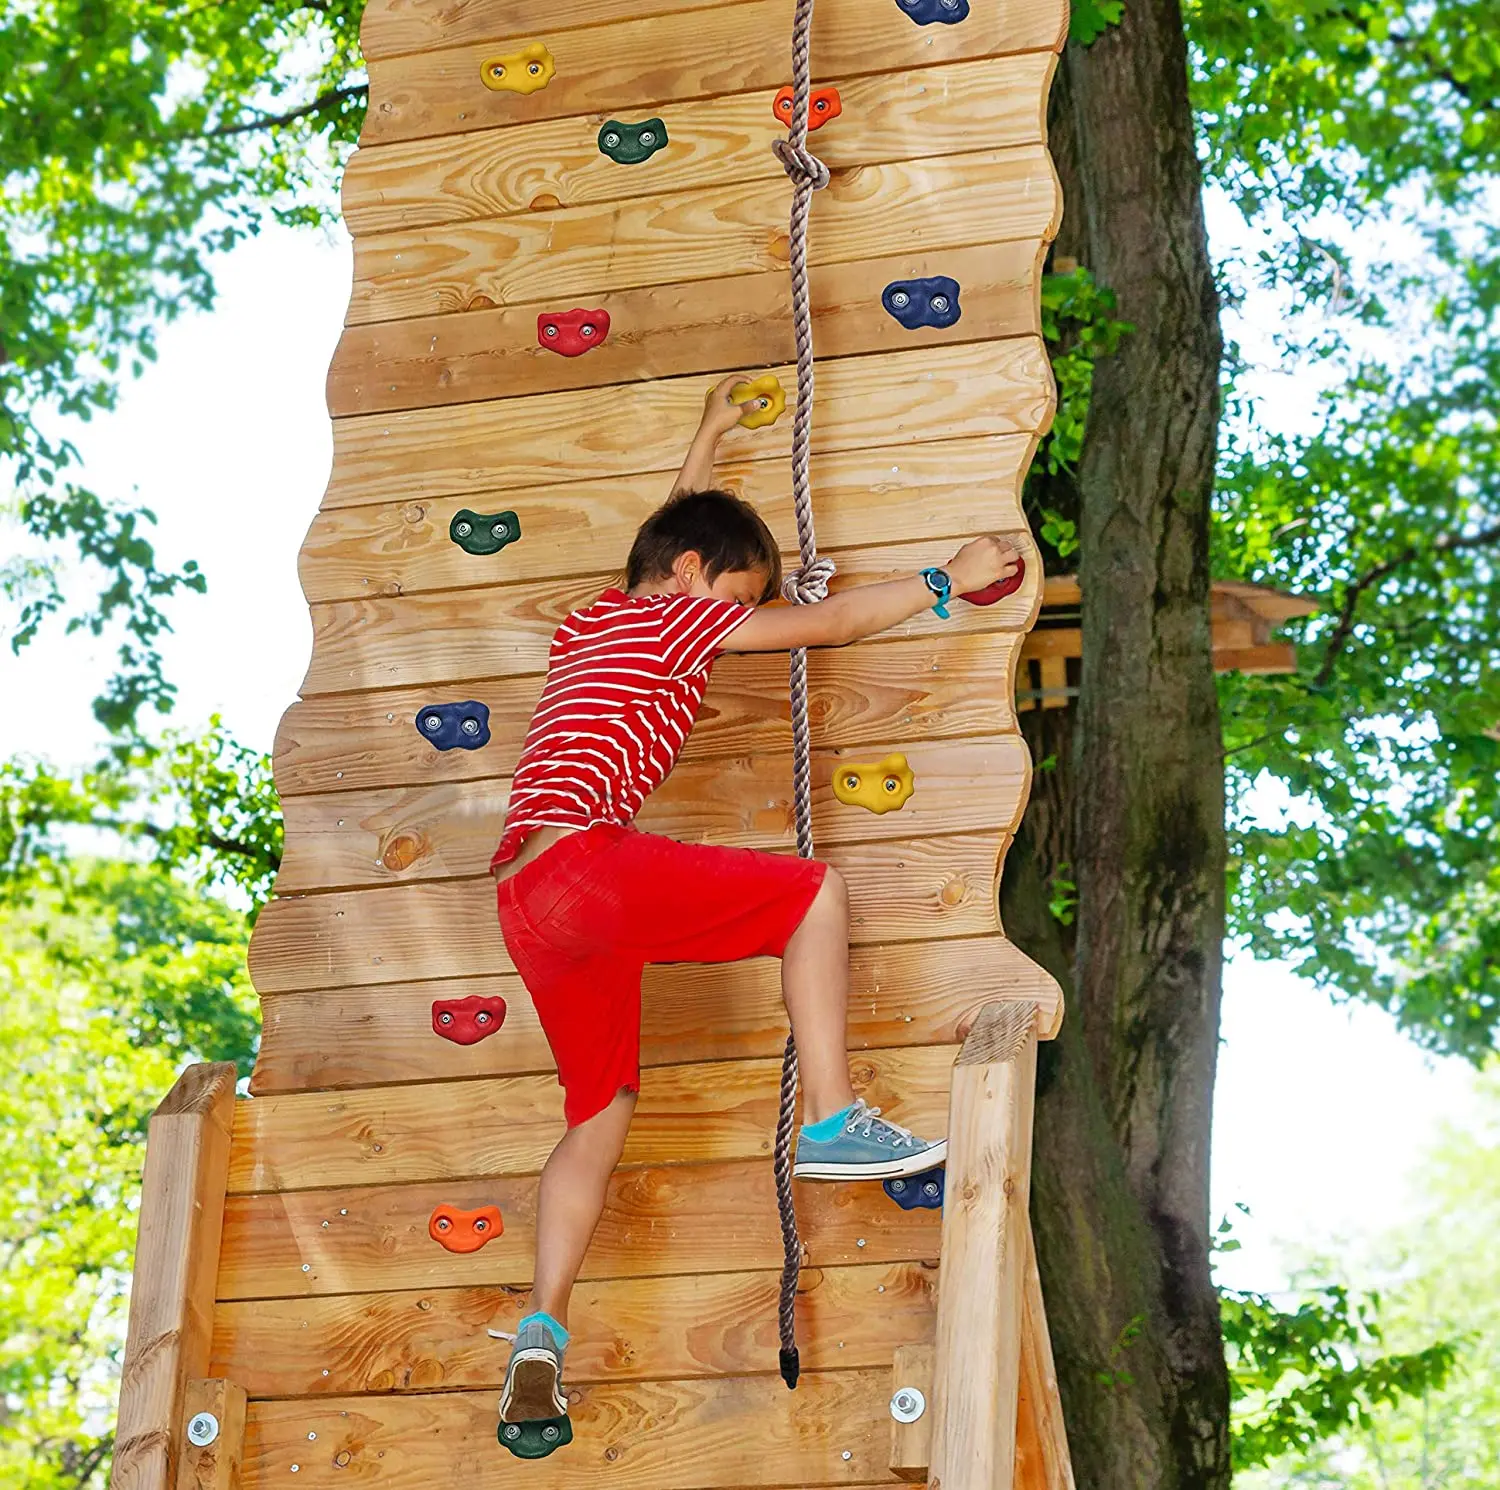 

10PCS DIY Rock Climbing Wall-Rock Climbing Holds for Kids and Adults-Included Mounting Hardware Climbing Rocks